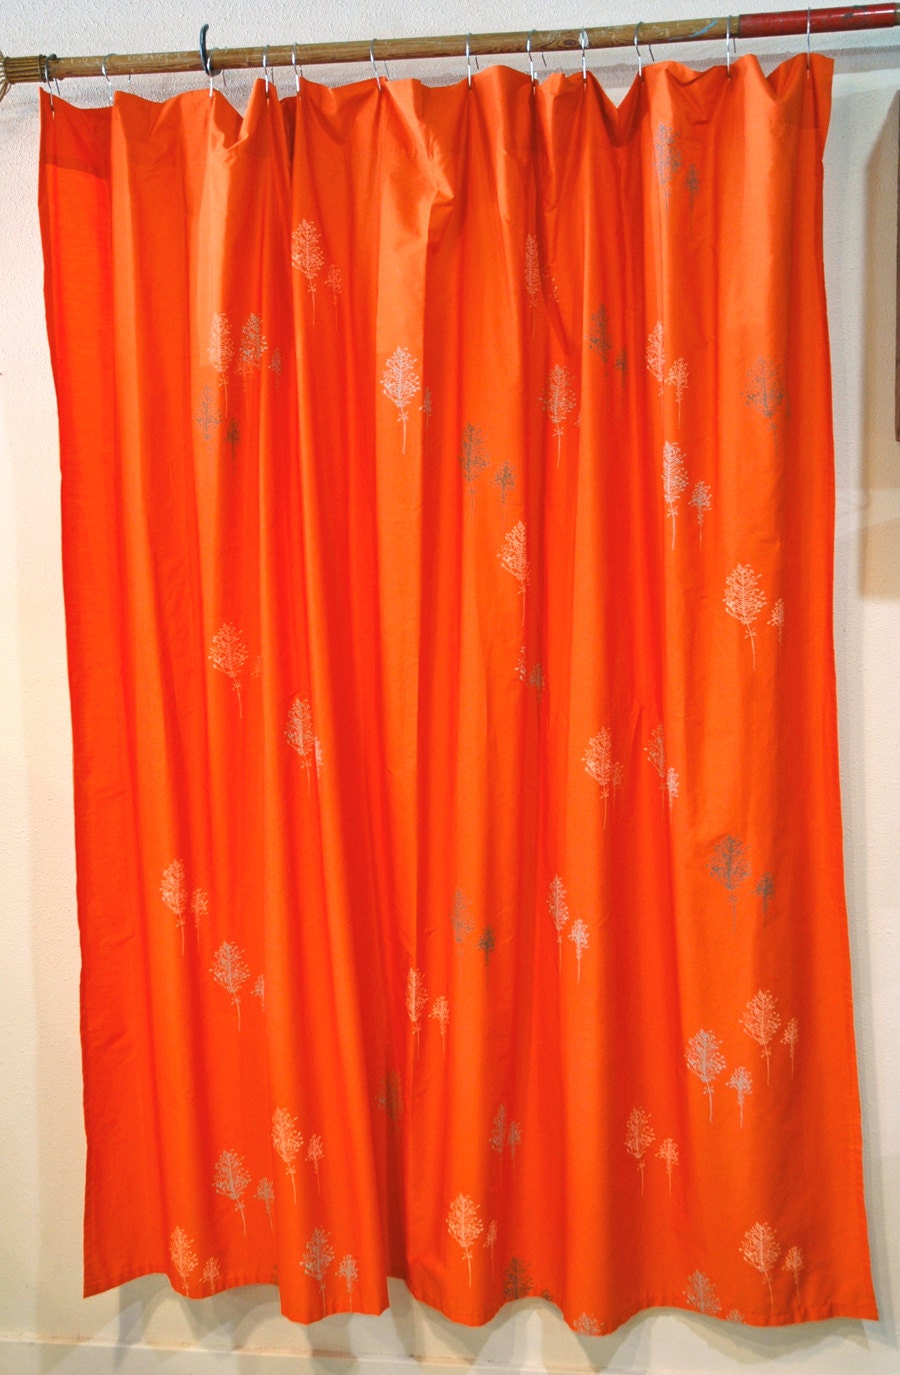 Zenith Curved Shower Curtain Rod Mint and Coral Shower Curtain